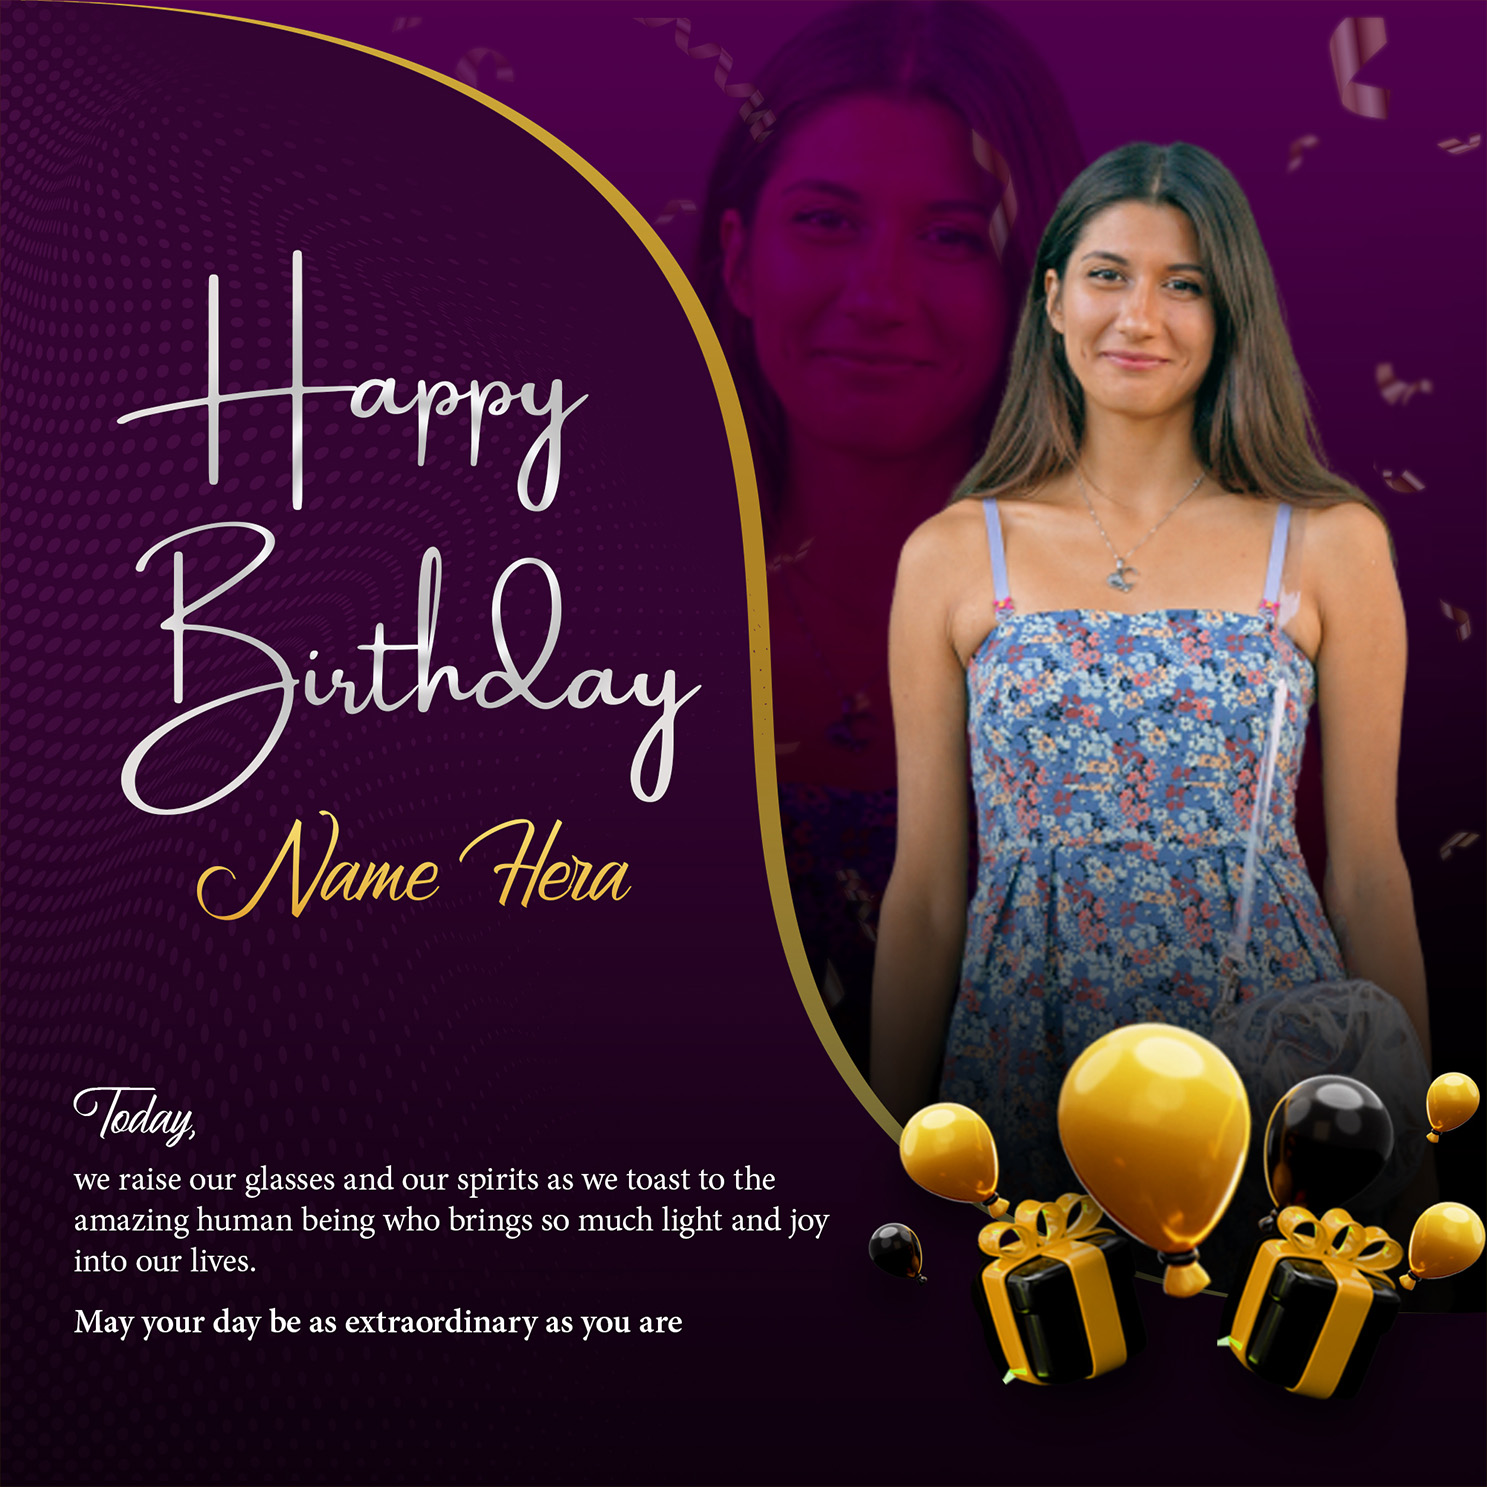 Happy birthday wish and celebration post design PSD template for social media preview image.